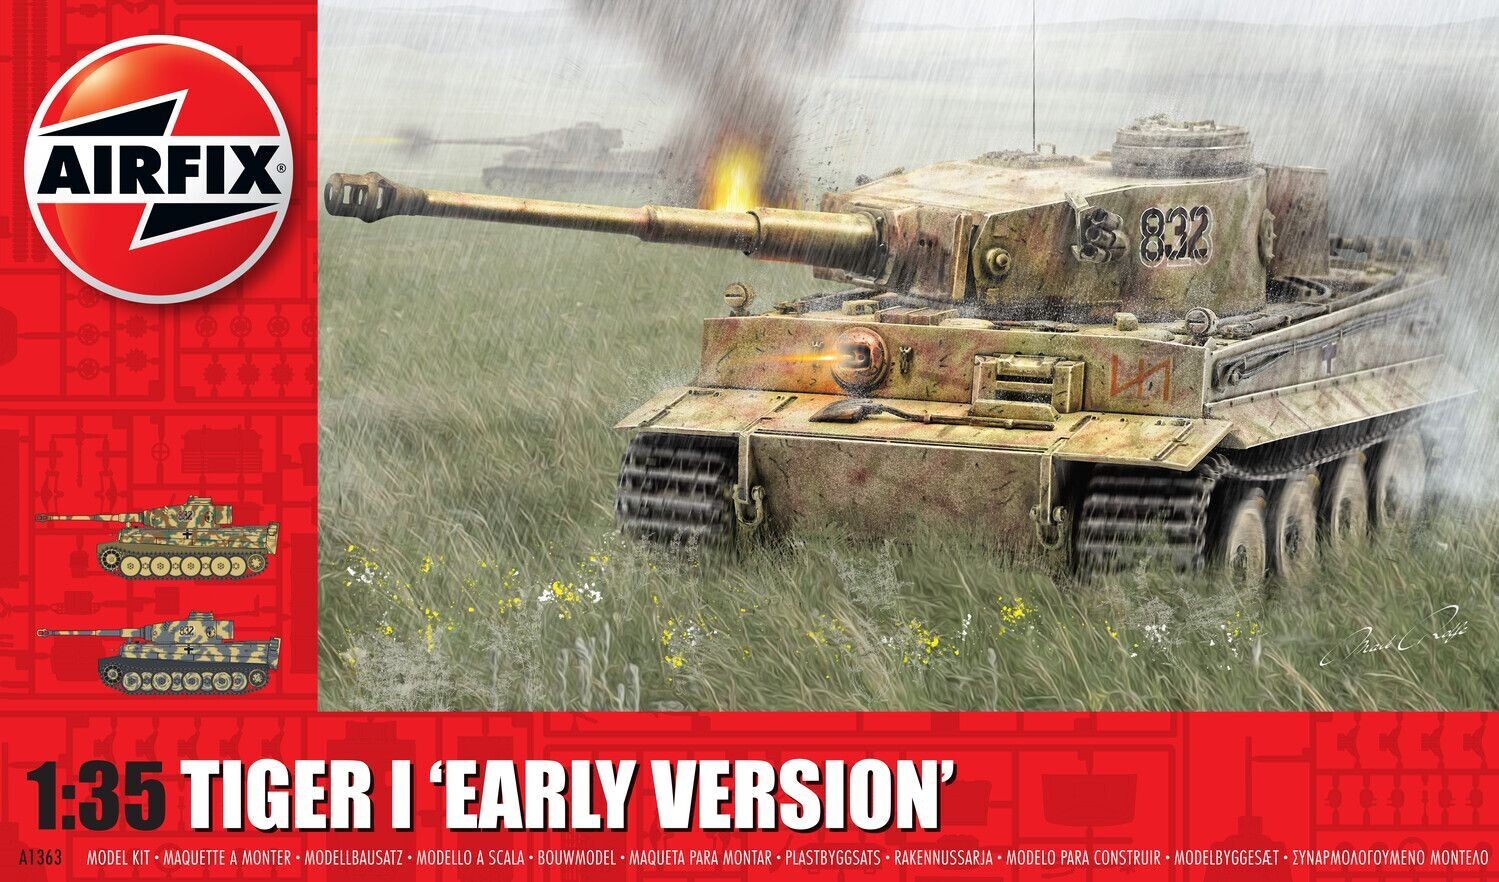 Airfix A1363 Tiger-1 "Early Version" 1:35 Scale Plastic Model Kit